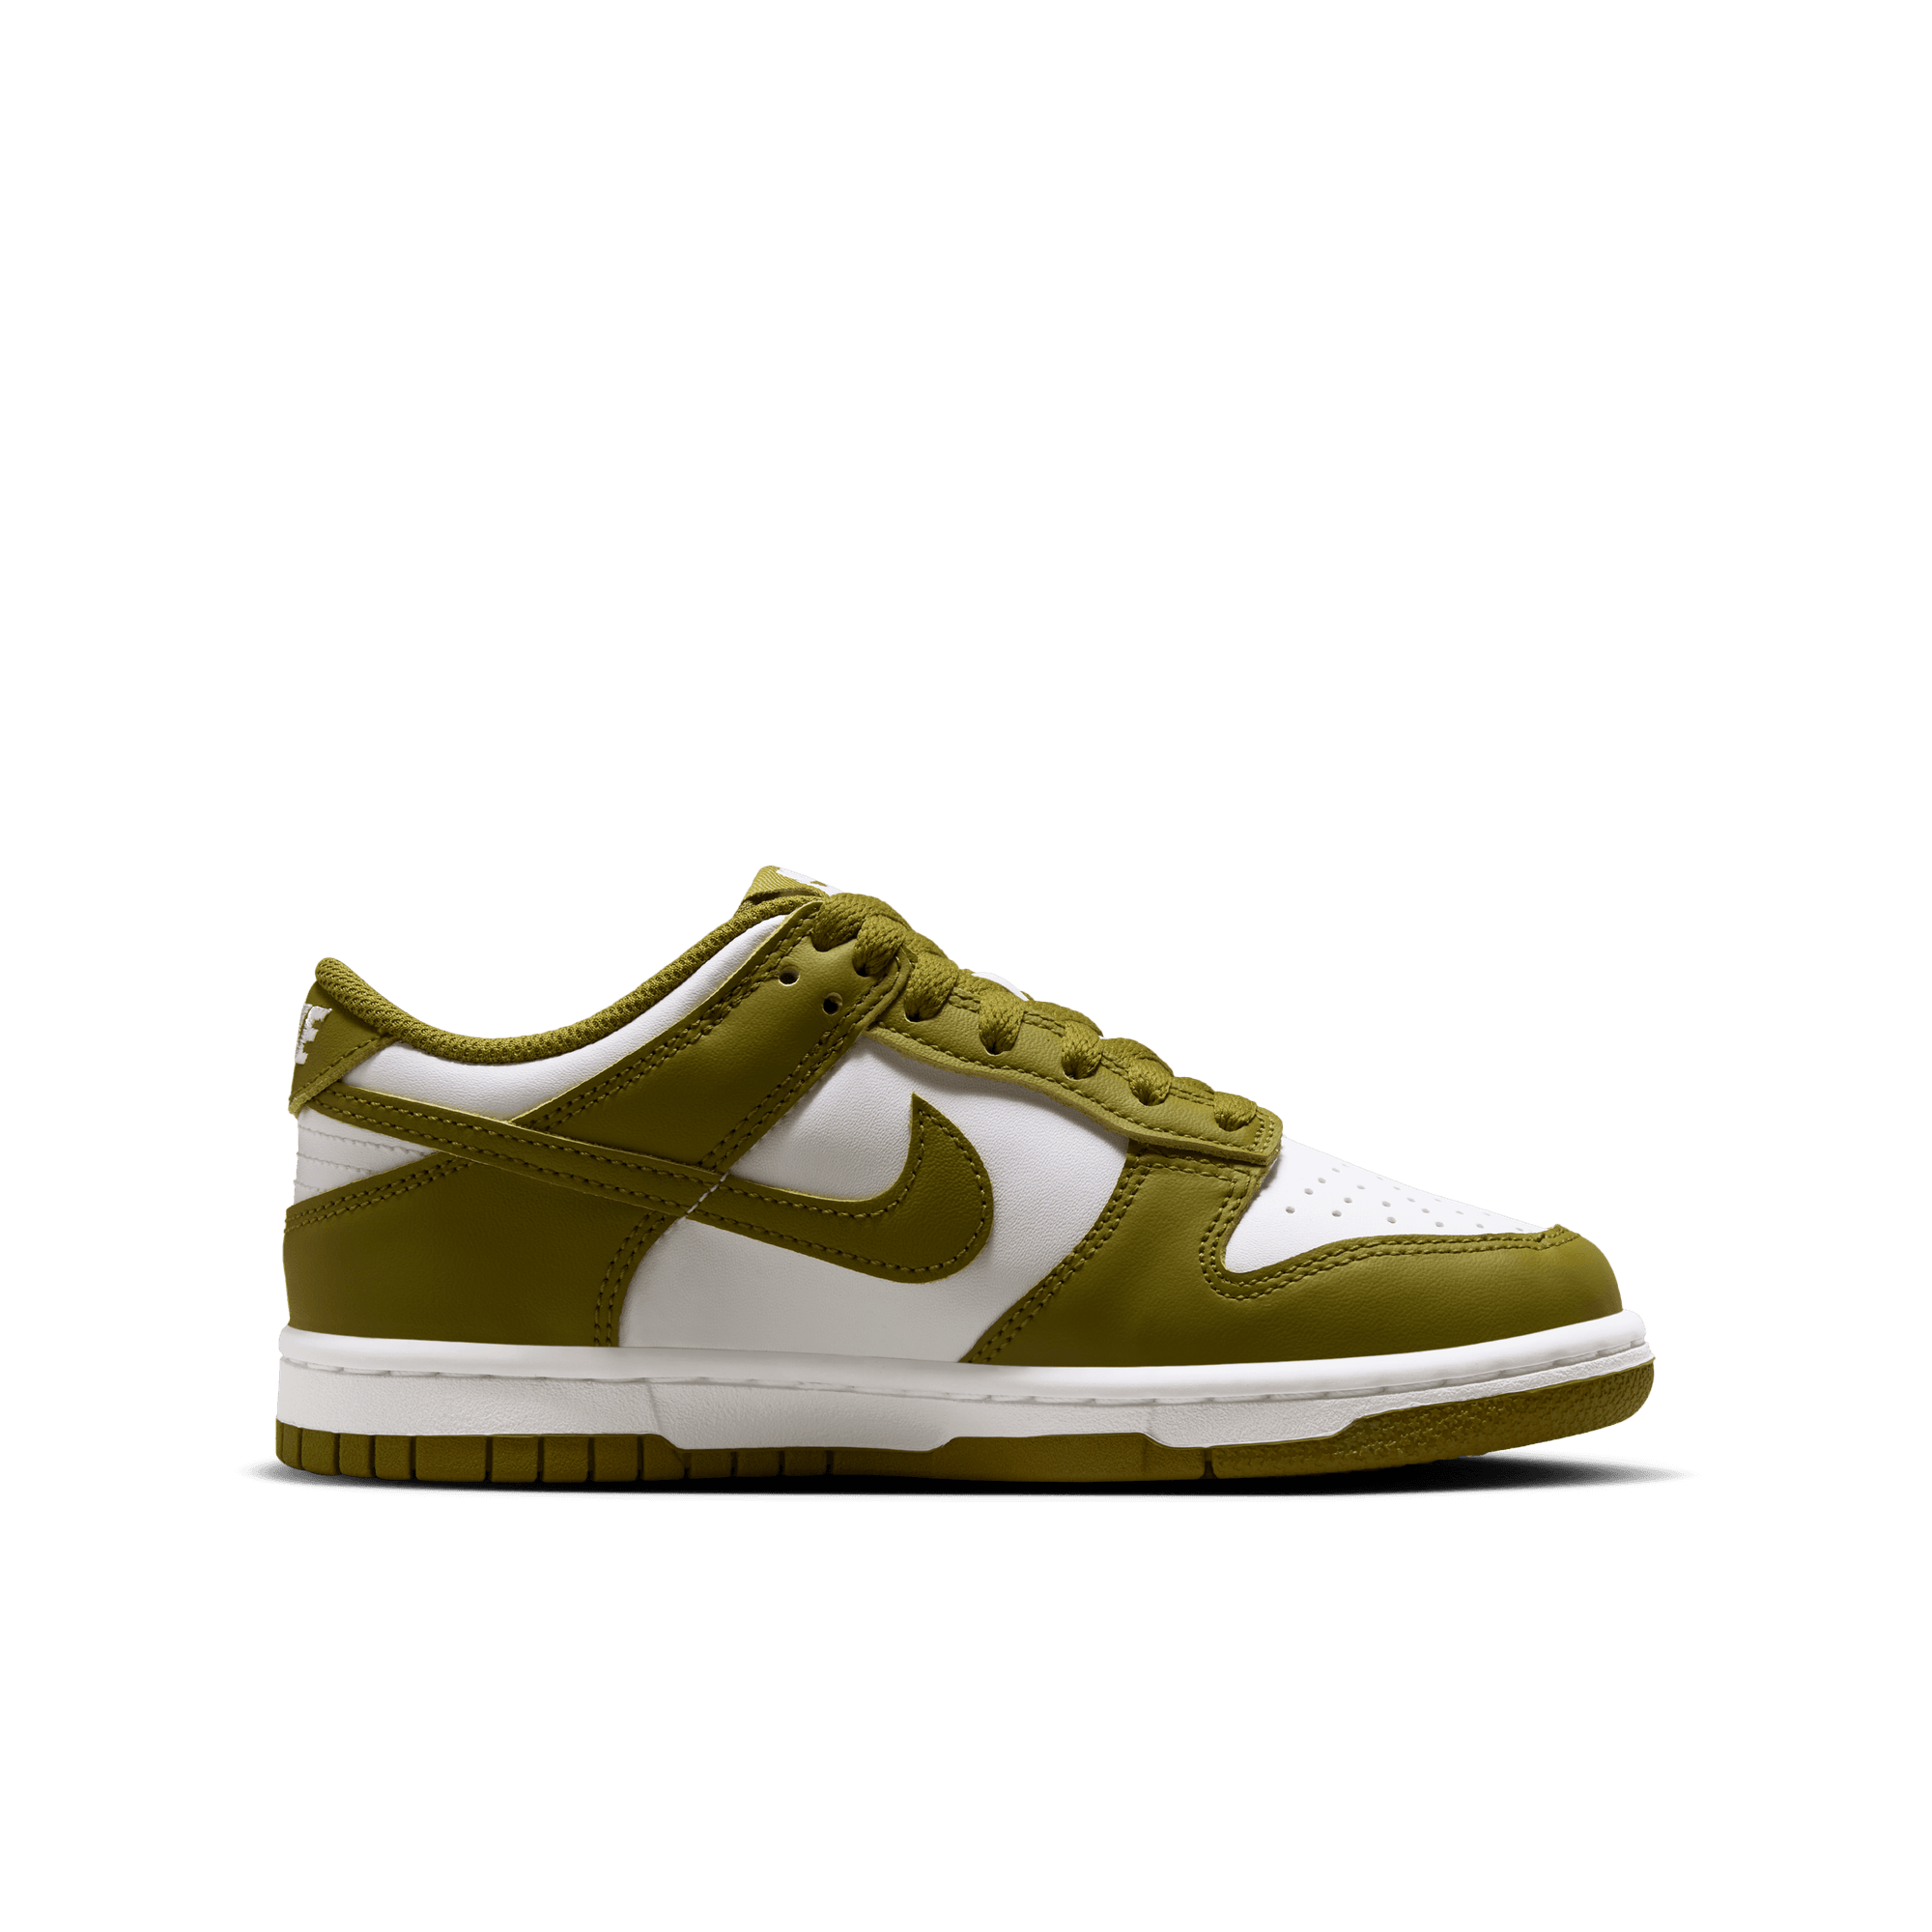 DUNK LOW (GS) "PACIFIC MOSS"